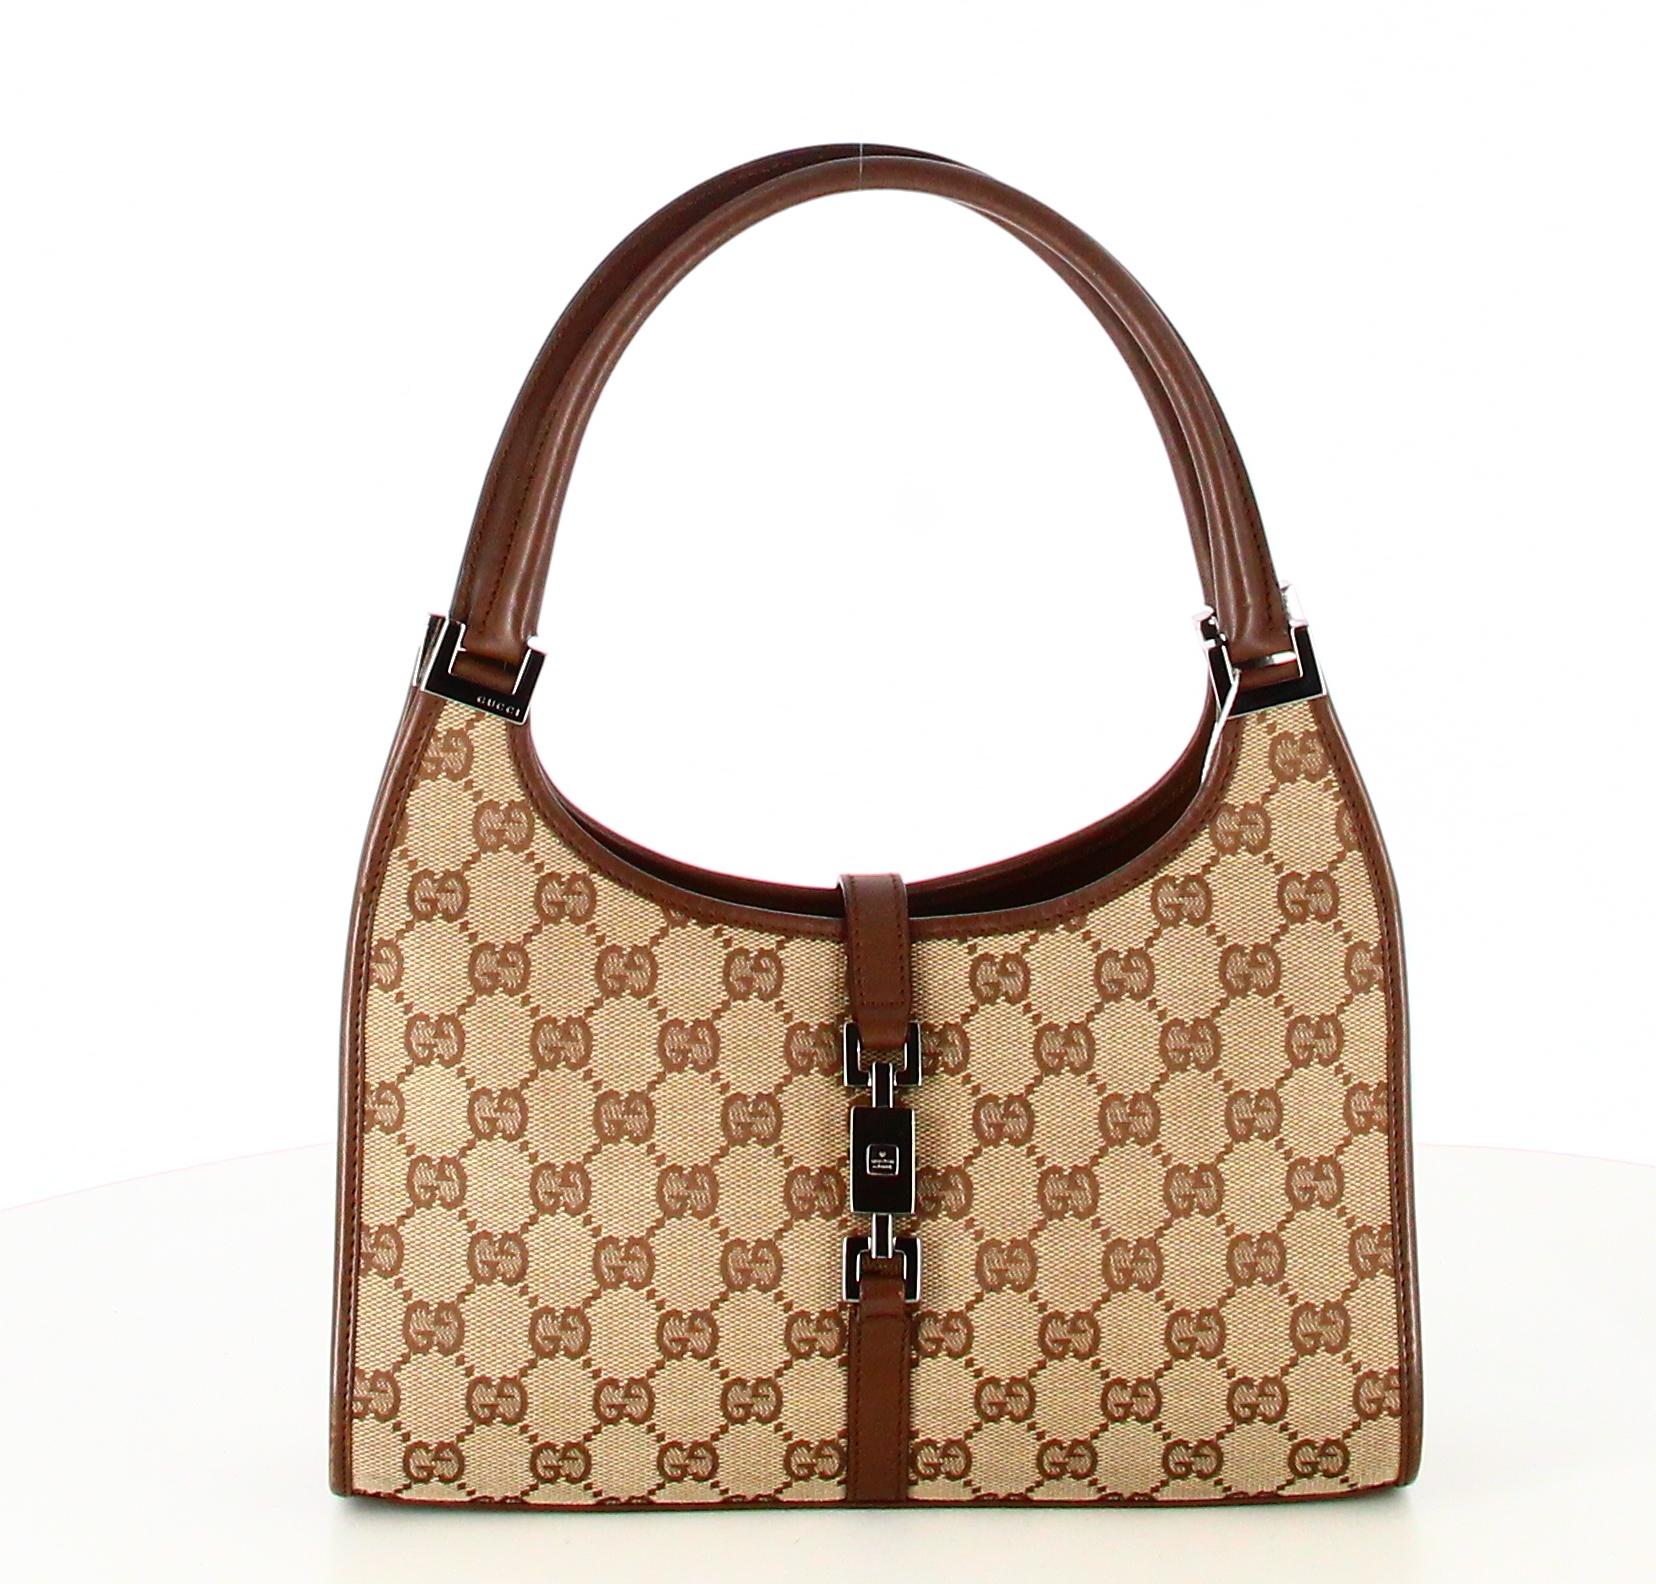 Gucci GG Canvas Handbag Jackie Bardot

- Very good condition. Shows very slight signs of wear over time.
- Gucci Handbag 
- Monogram canvas 
- Double brown leather straps 
- Clasp: Silver hook 
- Inside: monogrammed lining plus one zipped inside